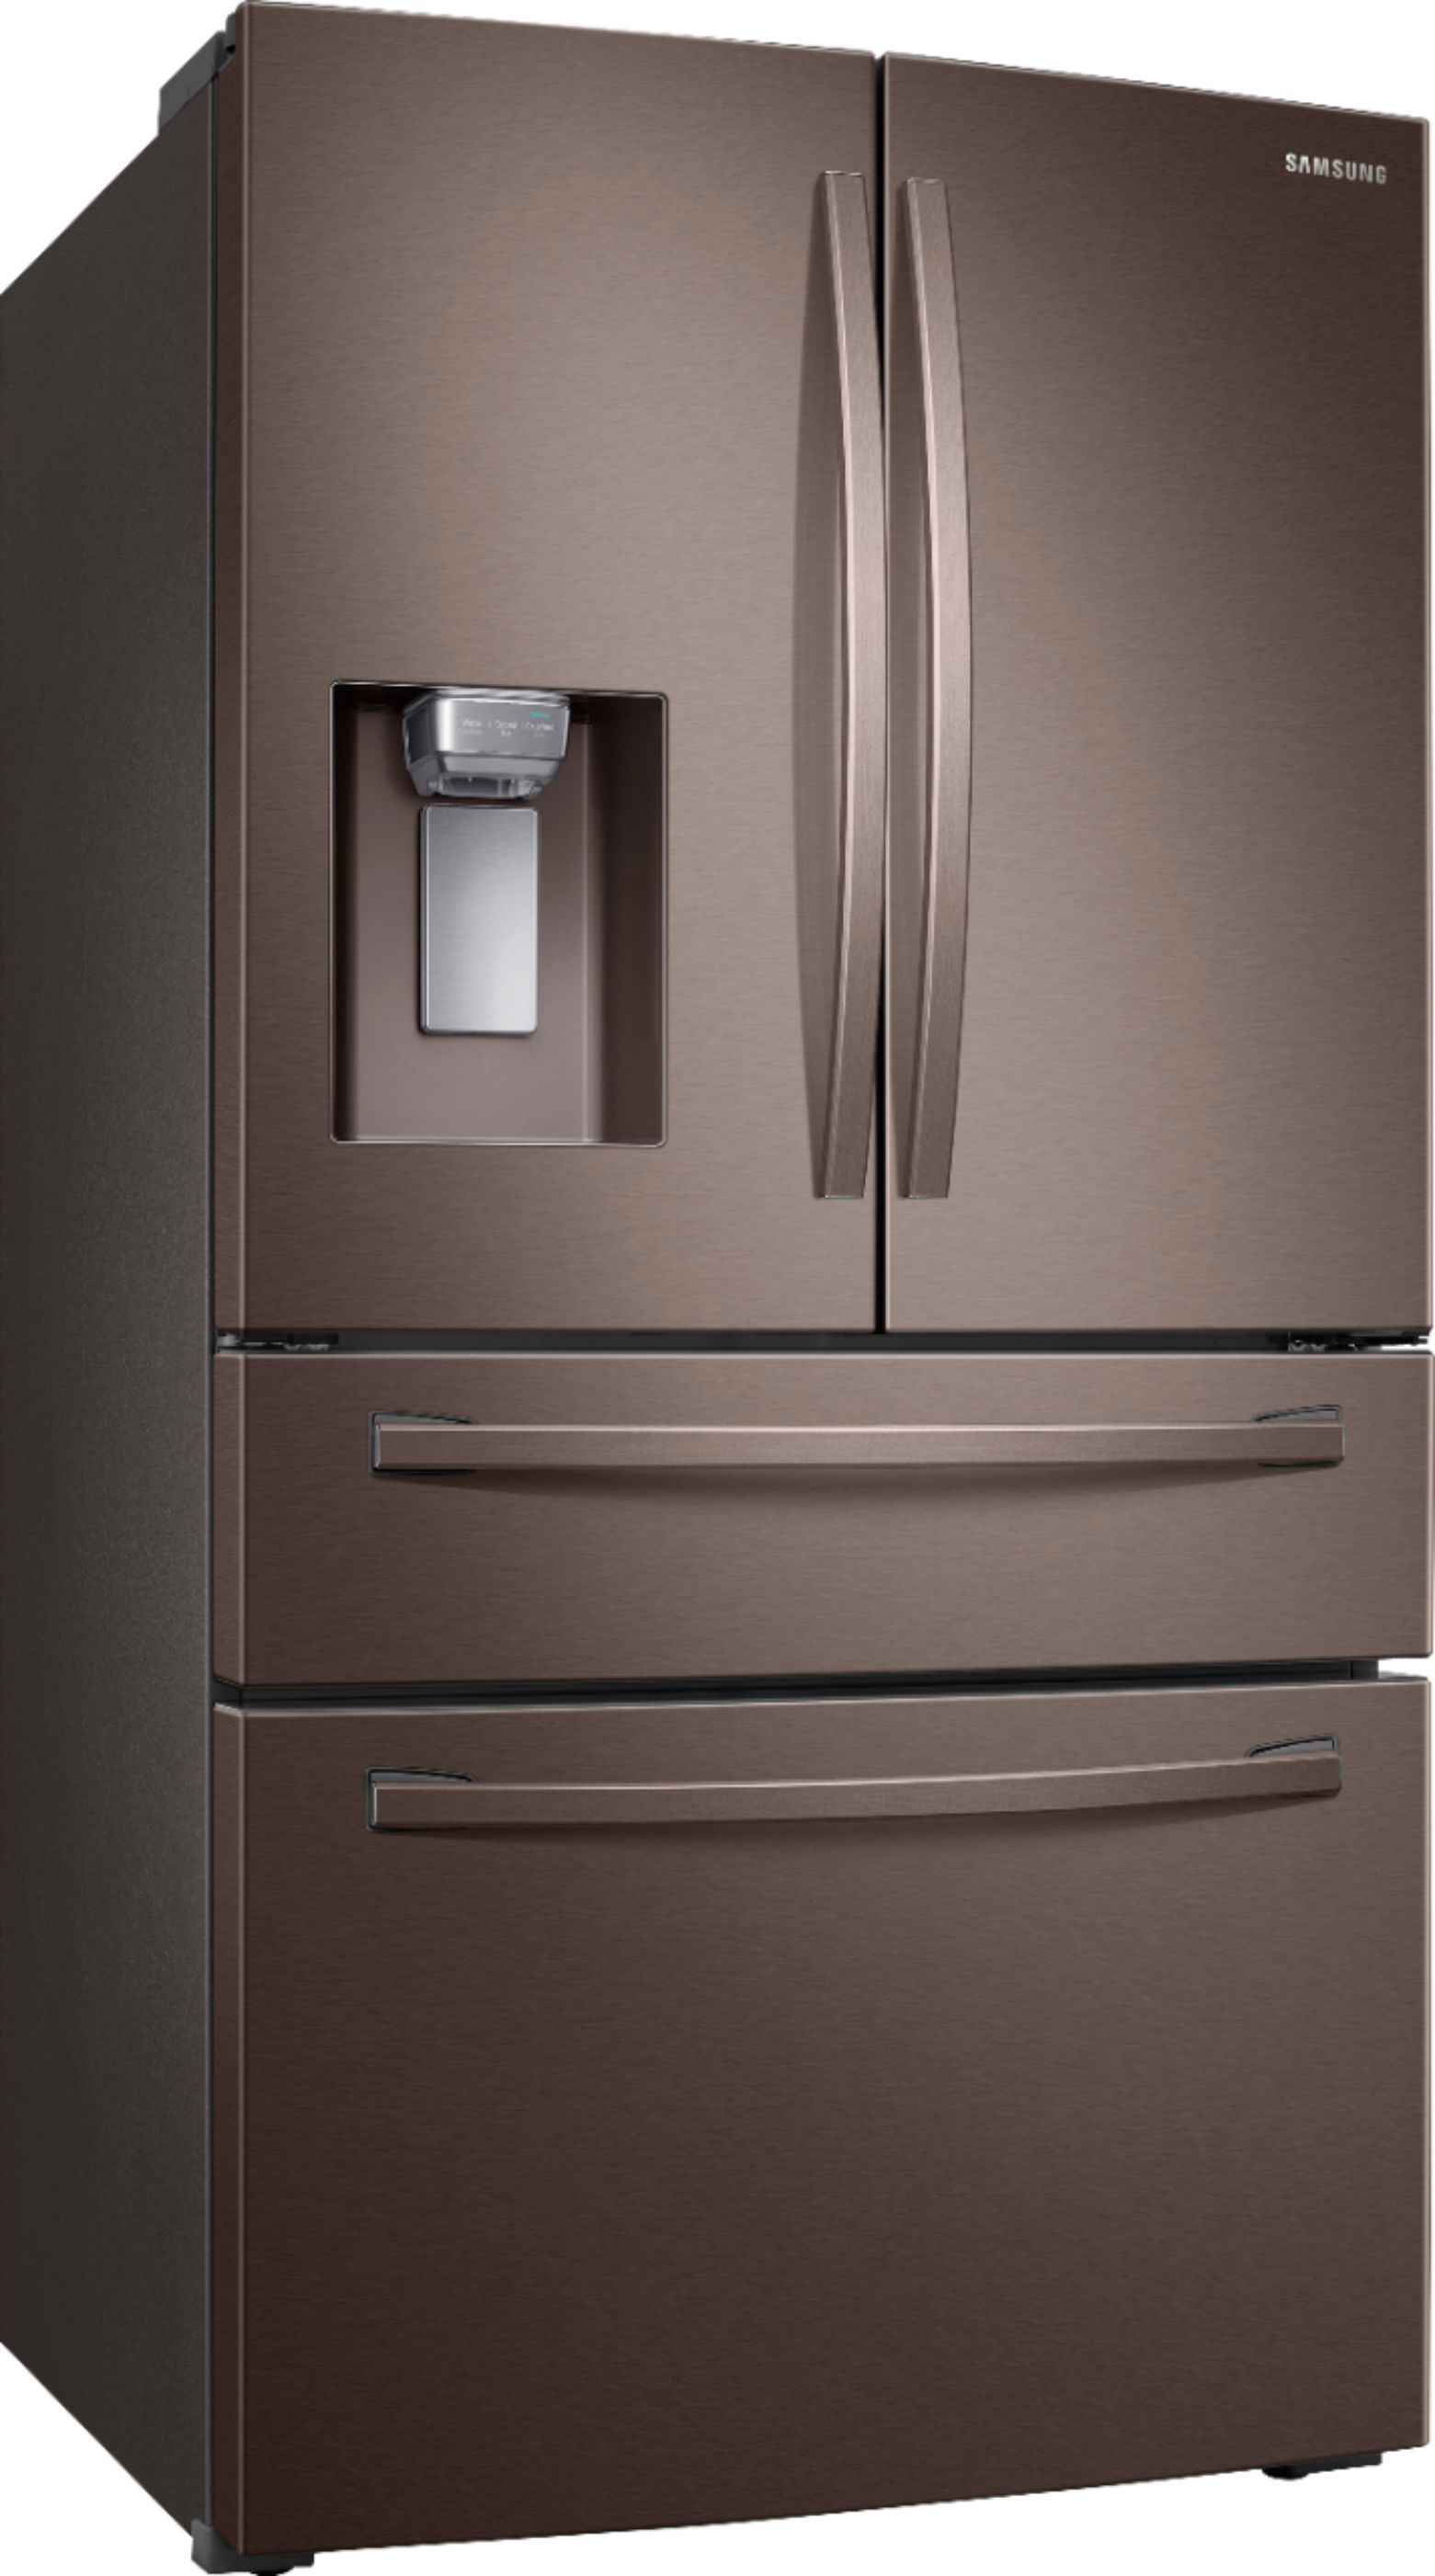 Angle View: Samsung - 22.6 Cu. Ft. 4-Door French Door Counter Depth Refrigerator - Tuscan Stainless Steel